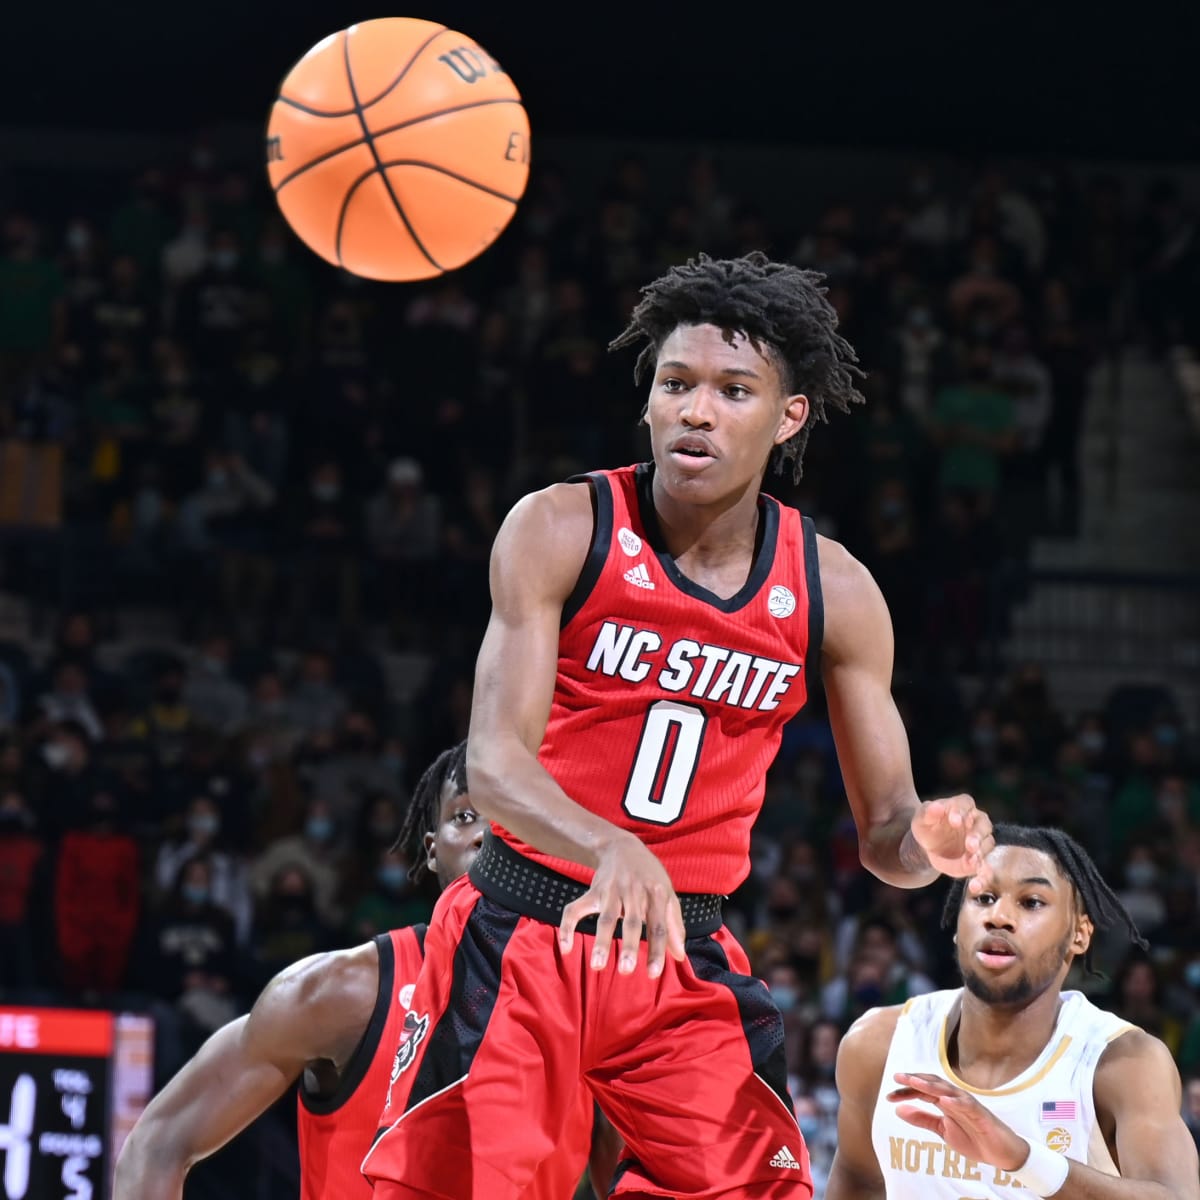 NC State freshman to declare for NBA Draft 